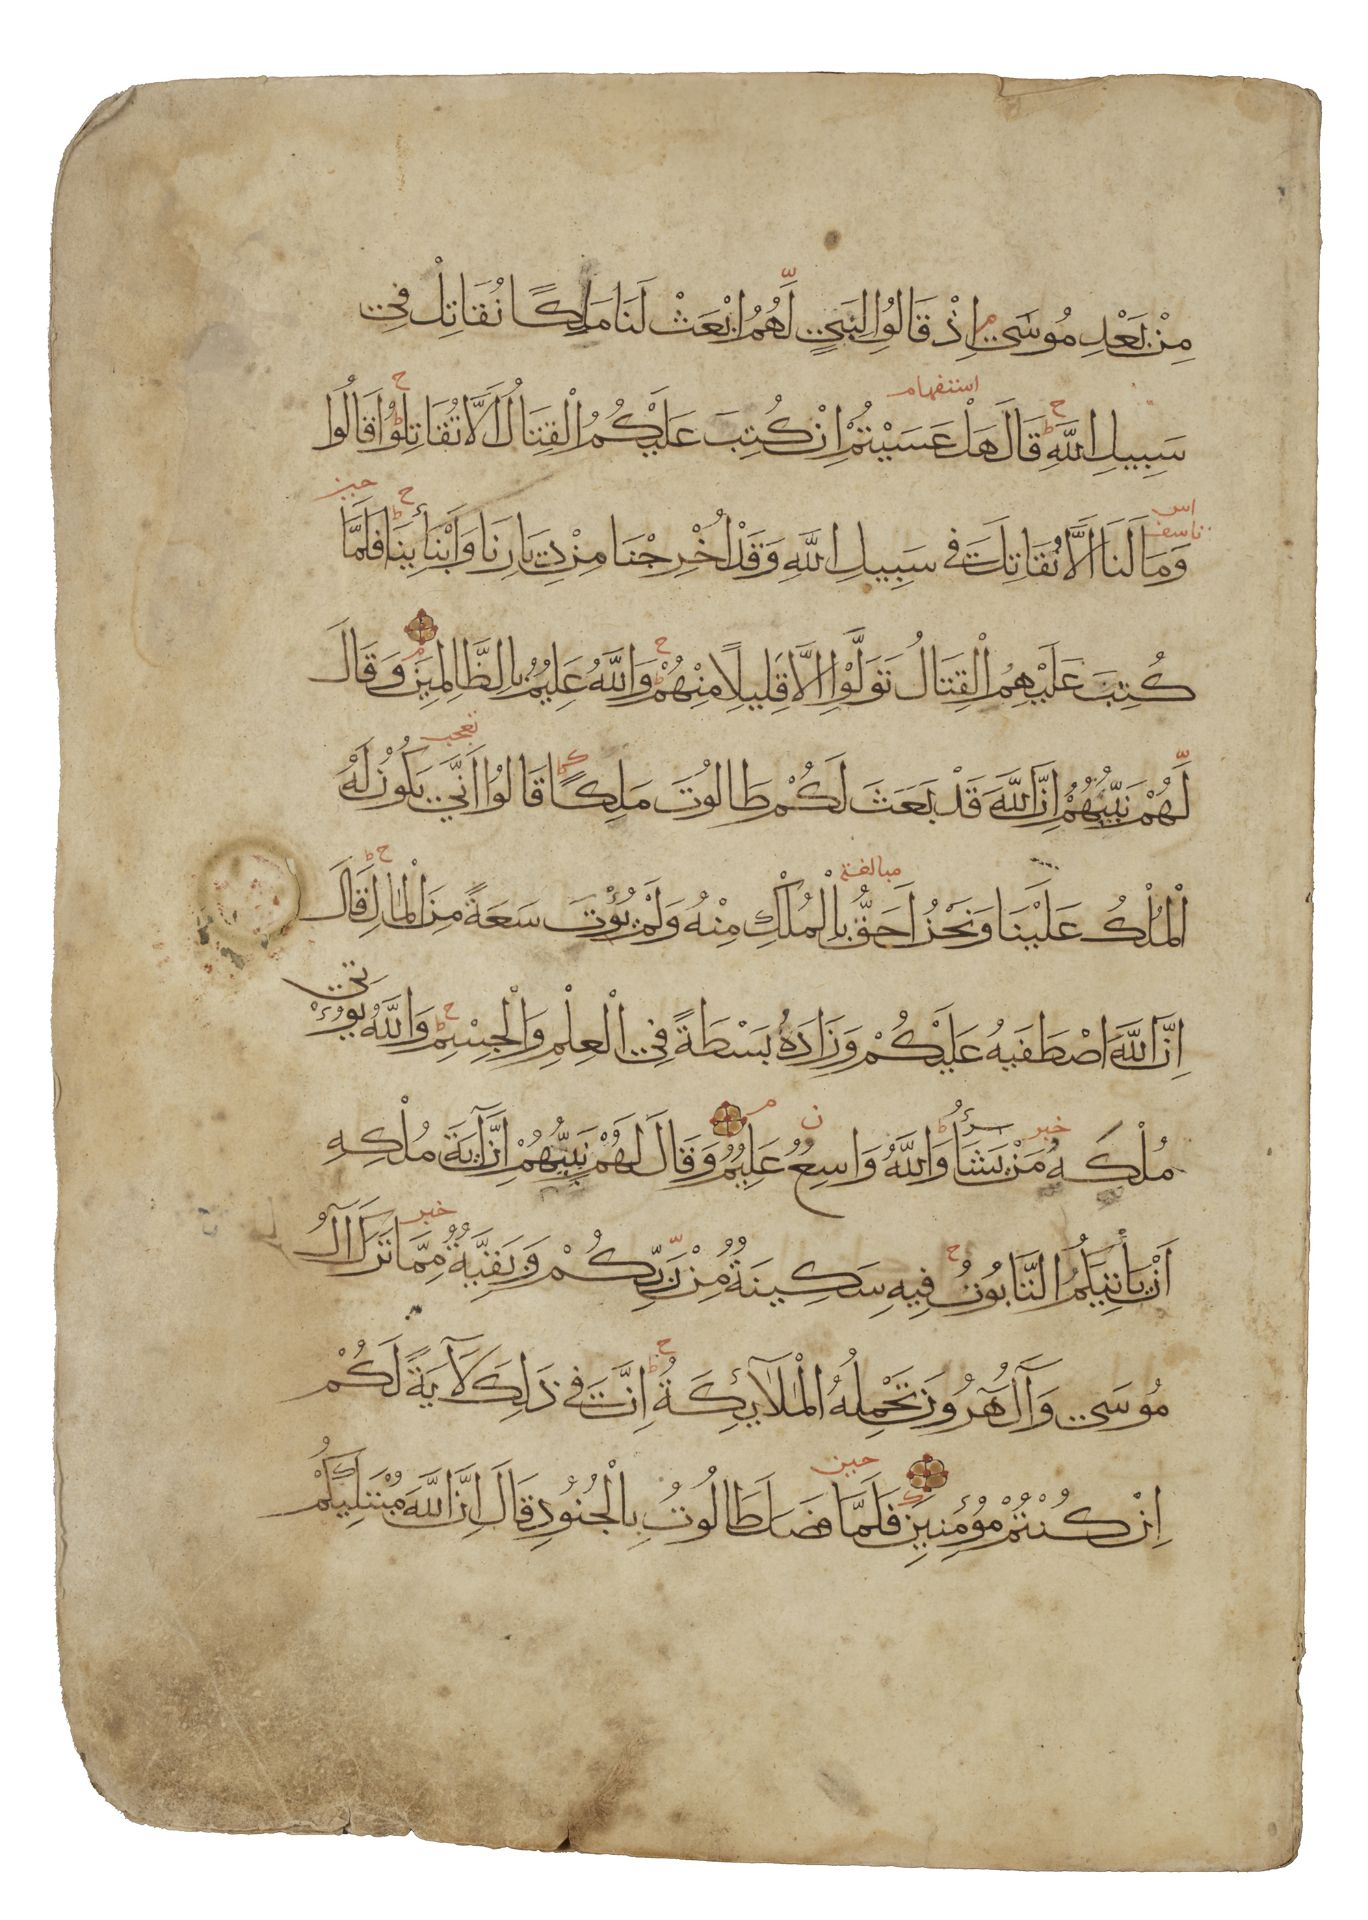 TWO QURAN PAGES, OTTOMAN, 14TH CENTURY - Image 5 of 5